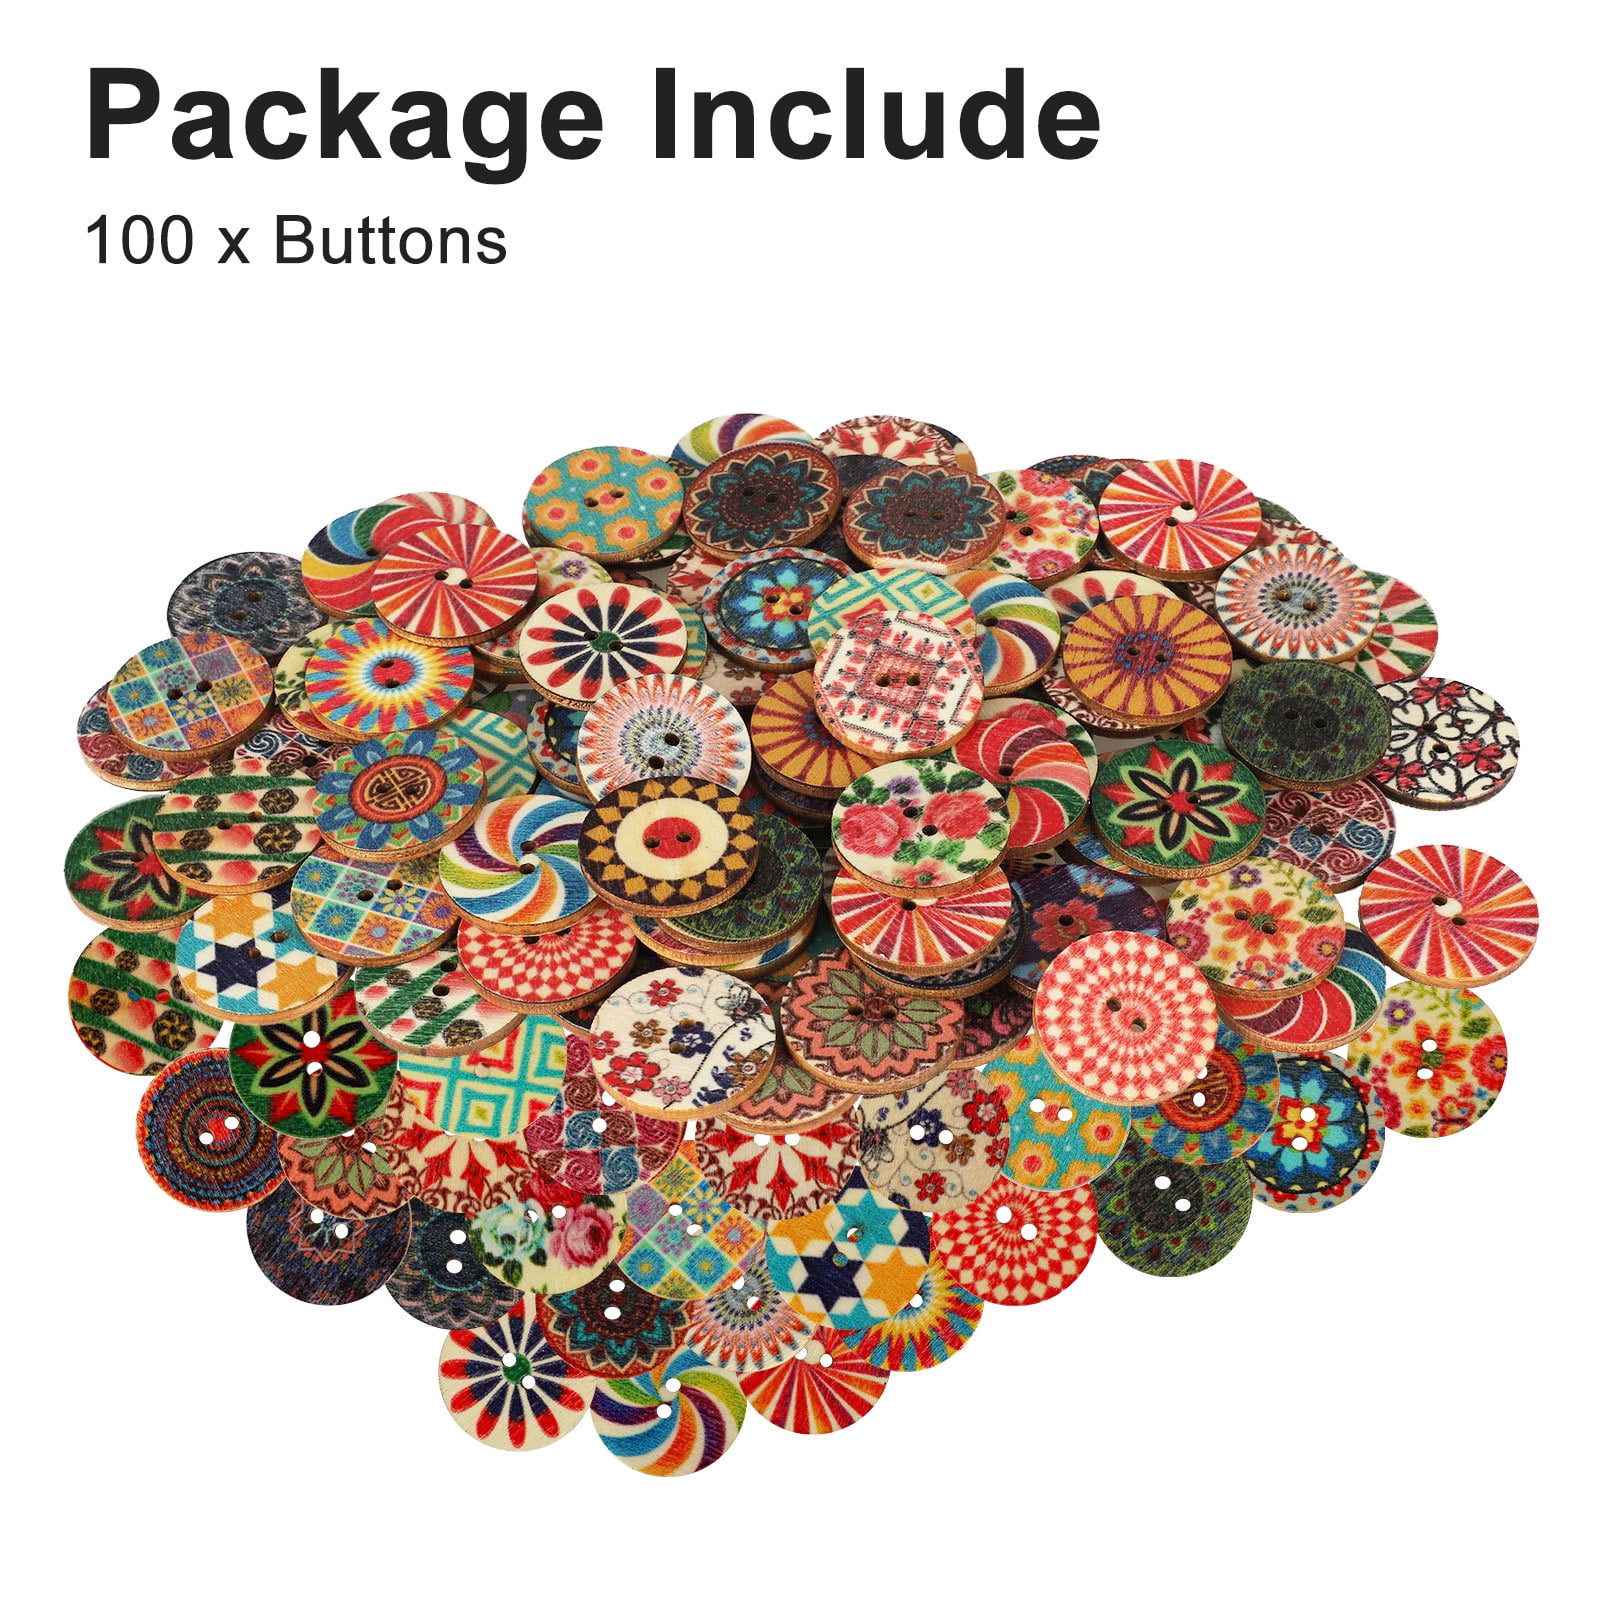 SEWACC 100Pcs Wooden Buttons House Decorations for Home Buttons for Crafts  Kids Retro Home Decor Vintage Home Decor Kids Decor Hand Decor Wooden Decor